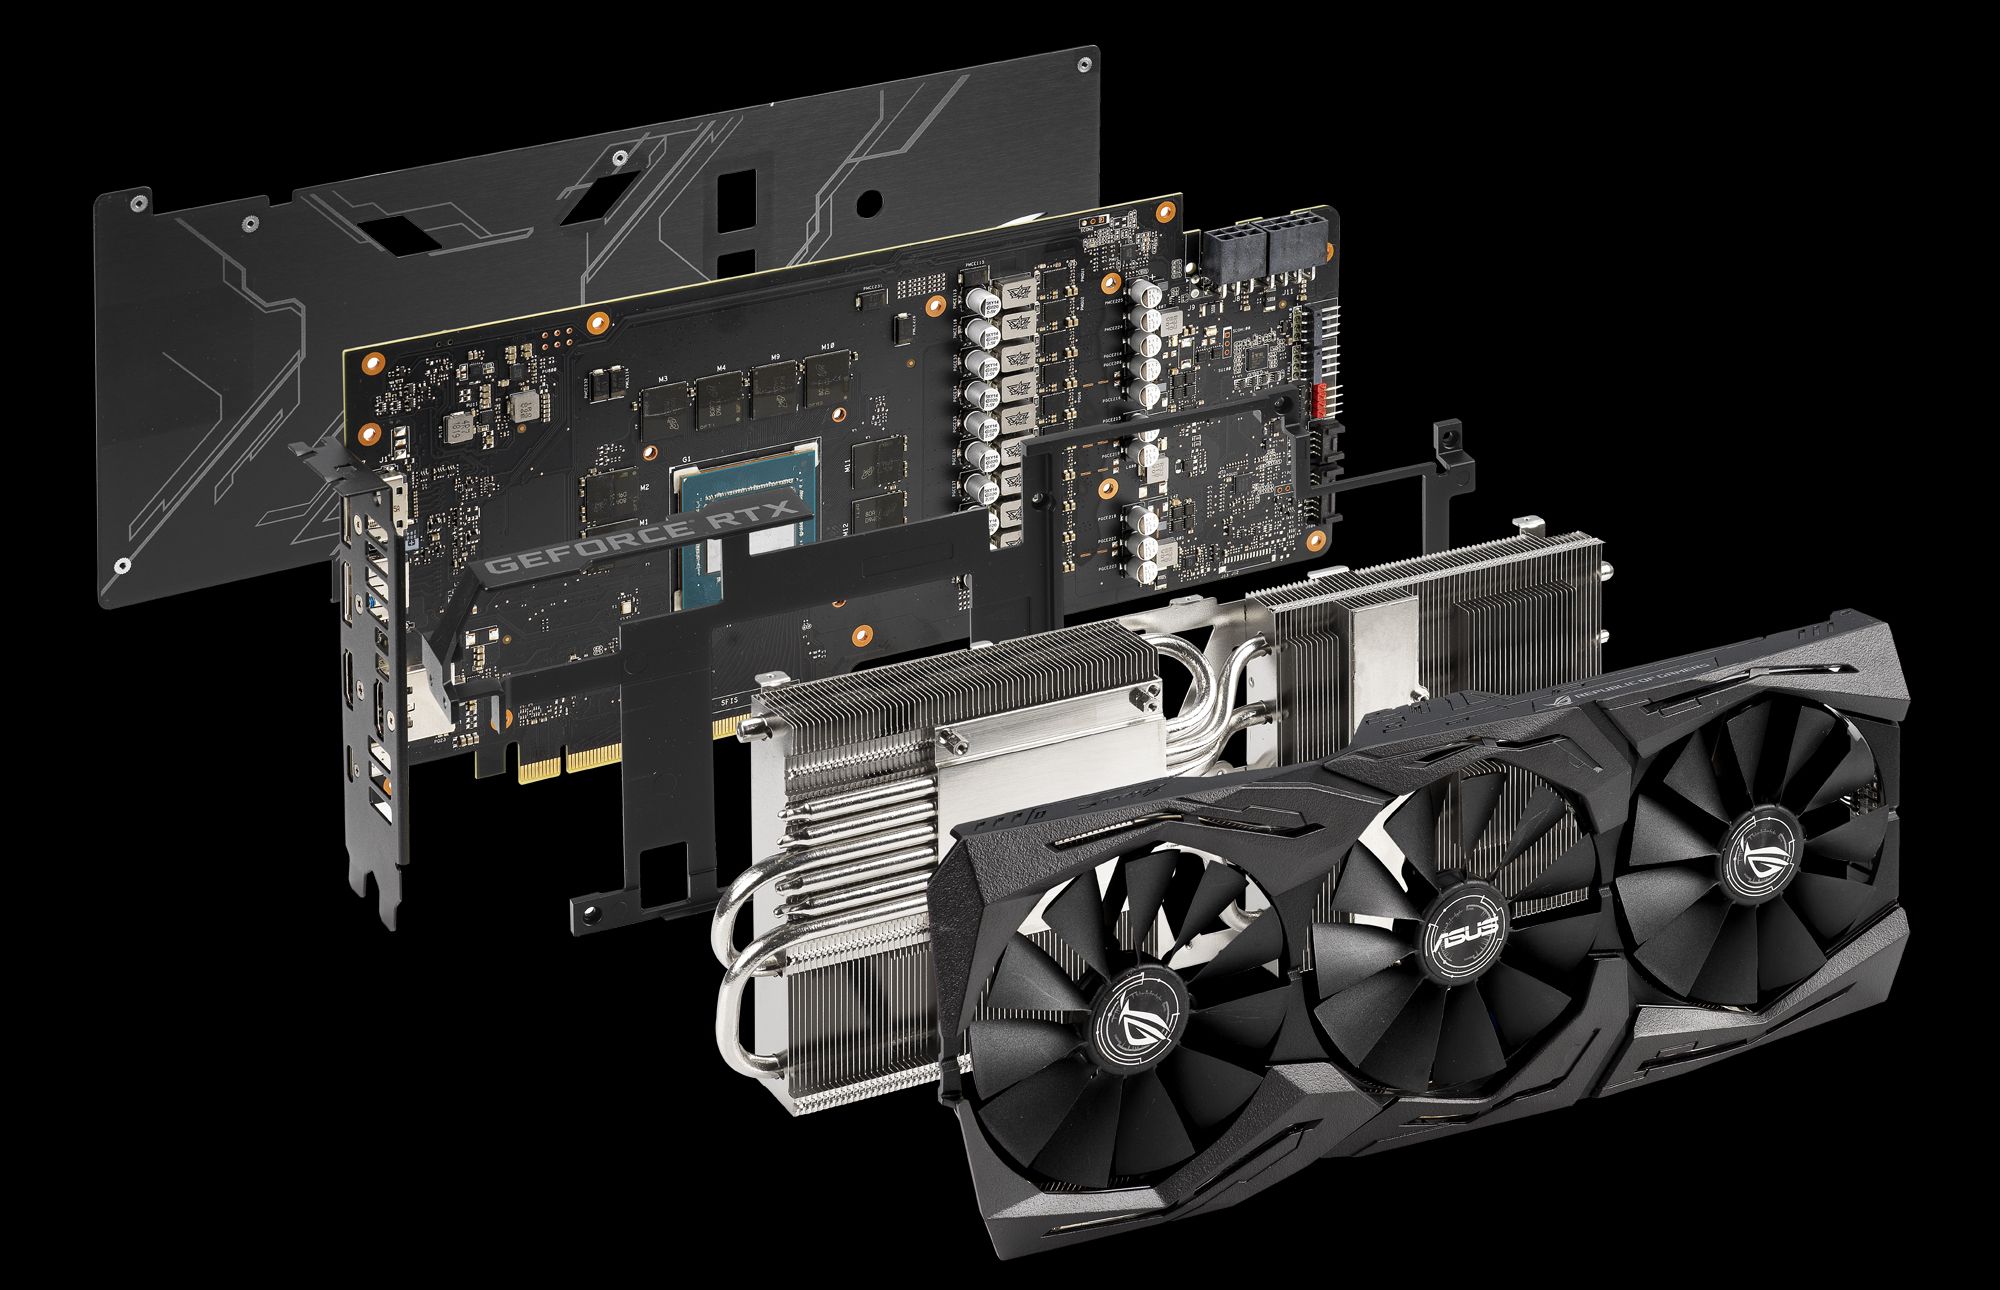 Here come the ROG and ASUS GeForce RTX 2070 graphics cards